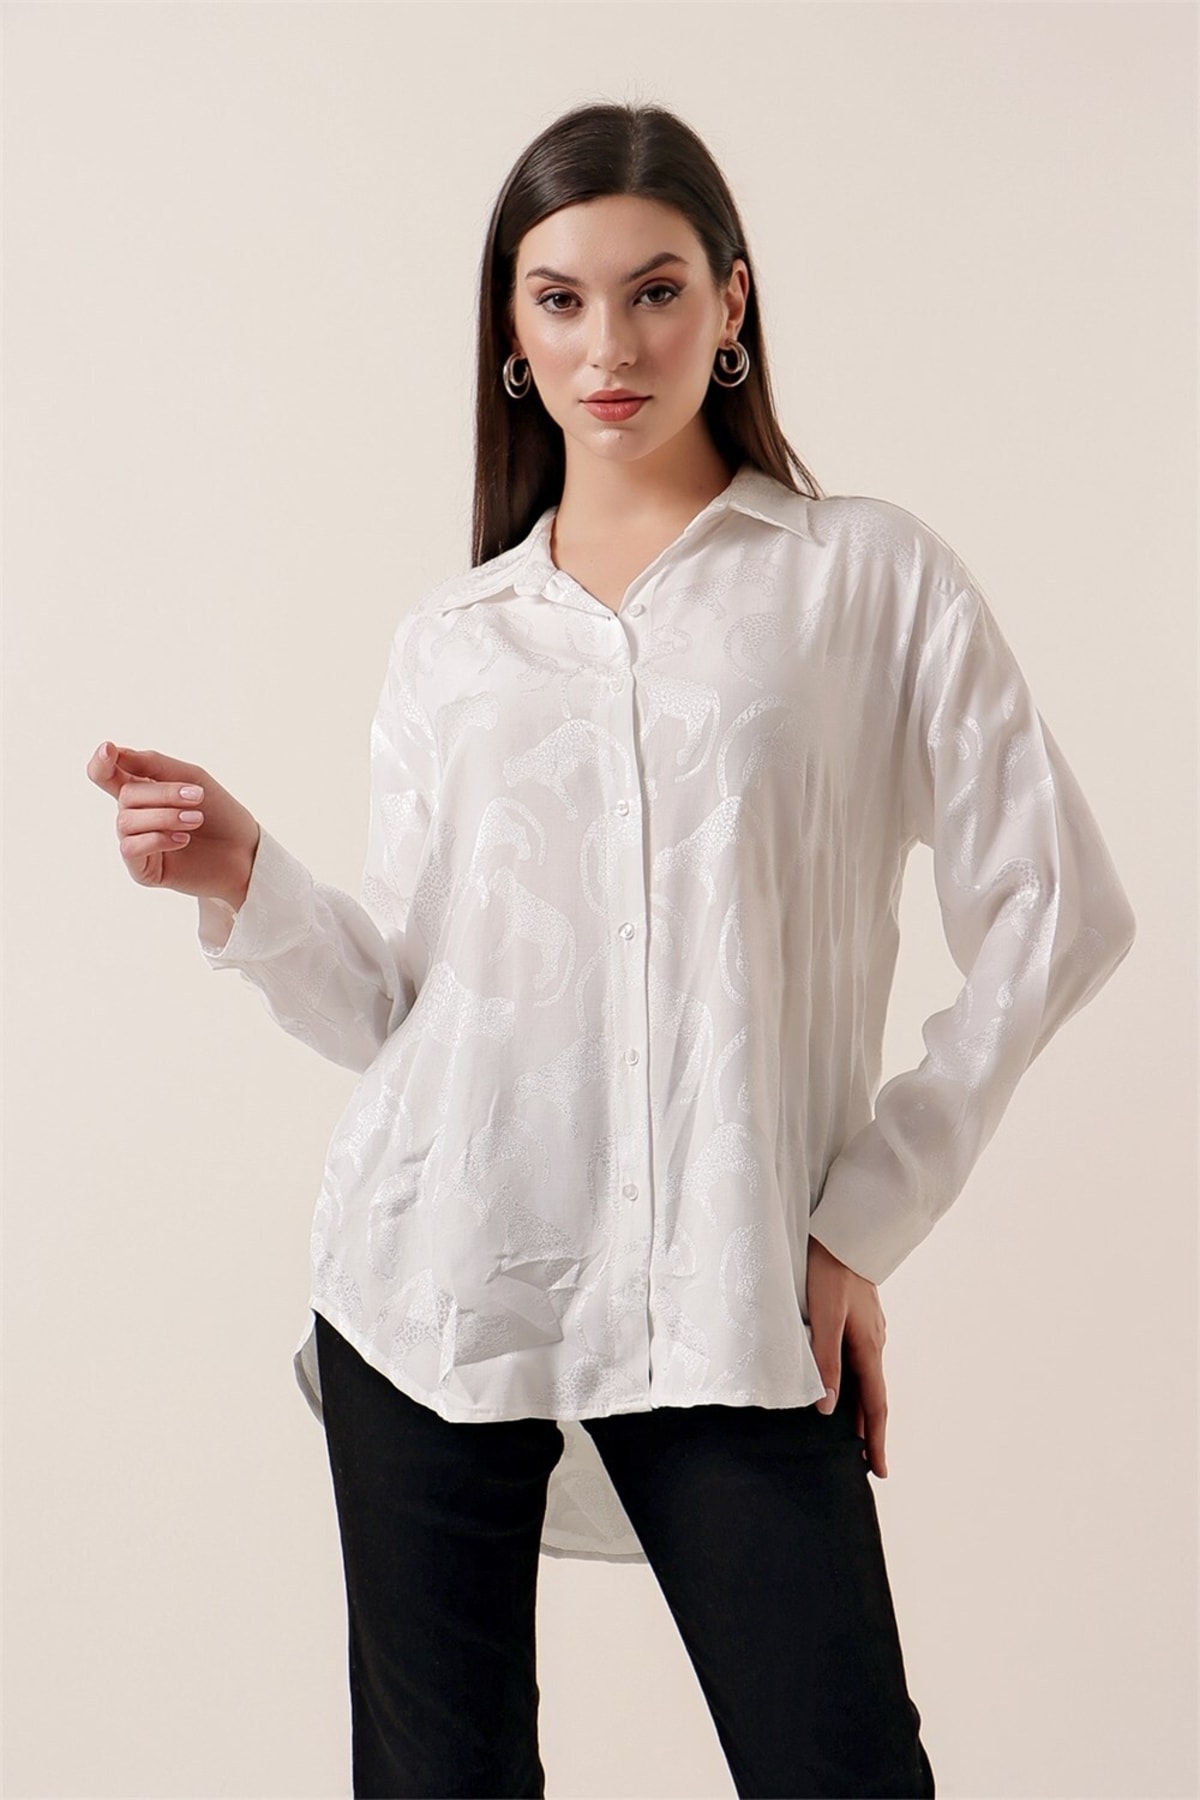 By Saygı Leopard Embroidered Shirt White